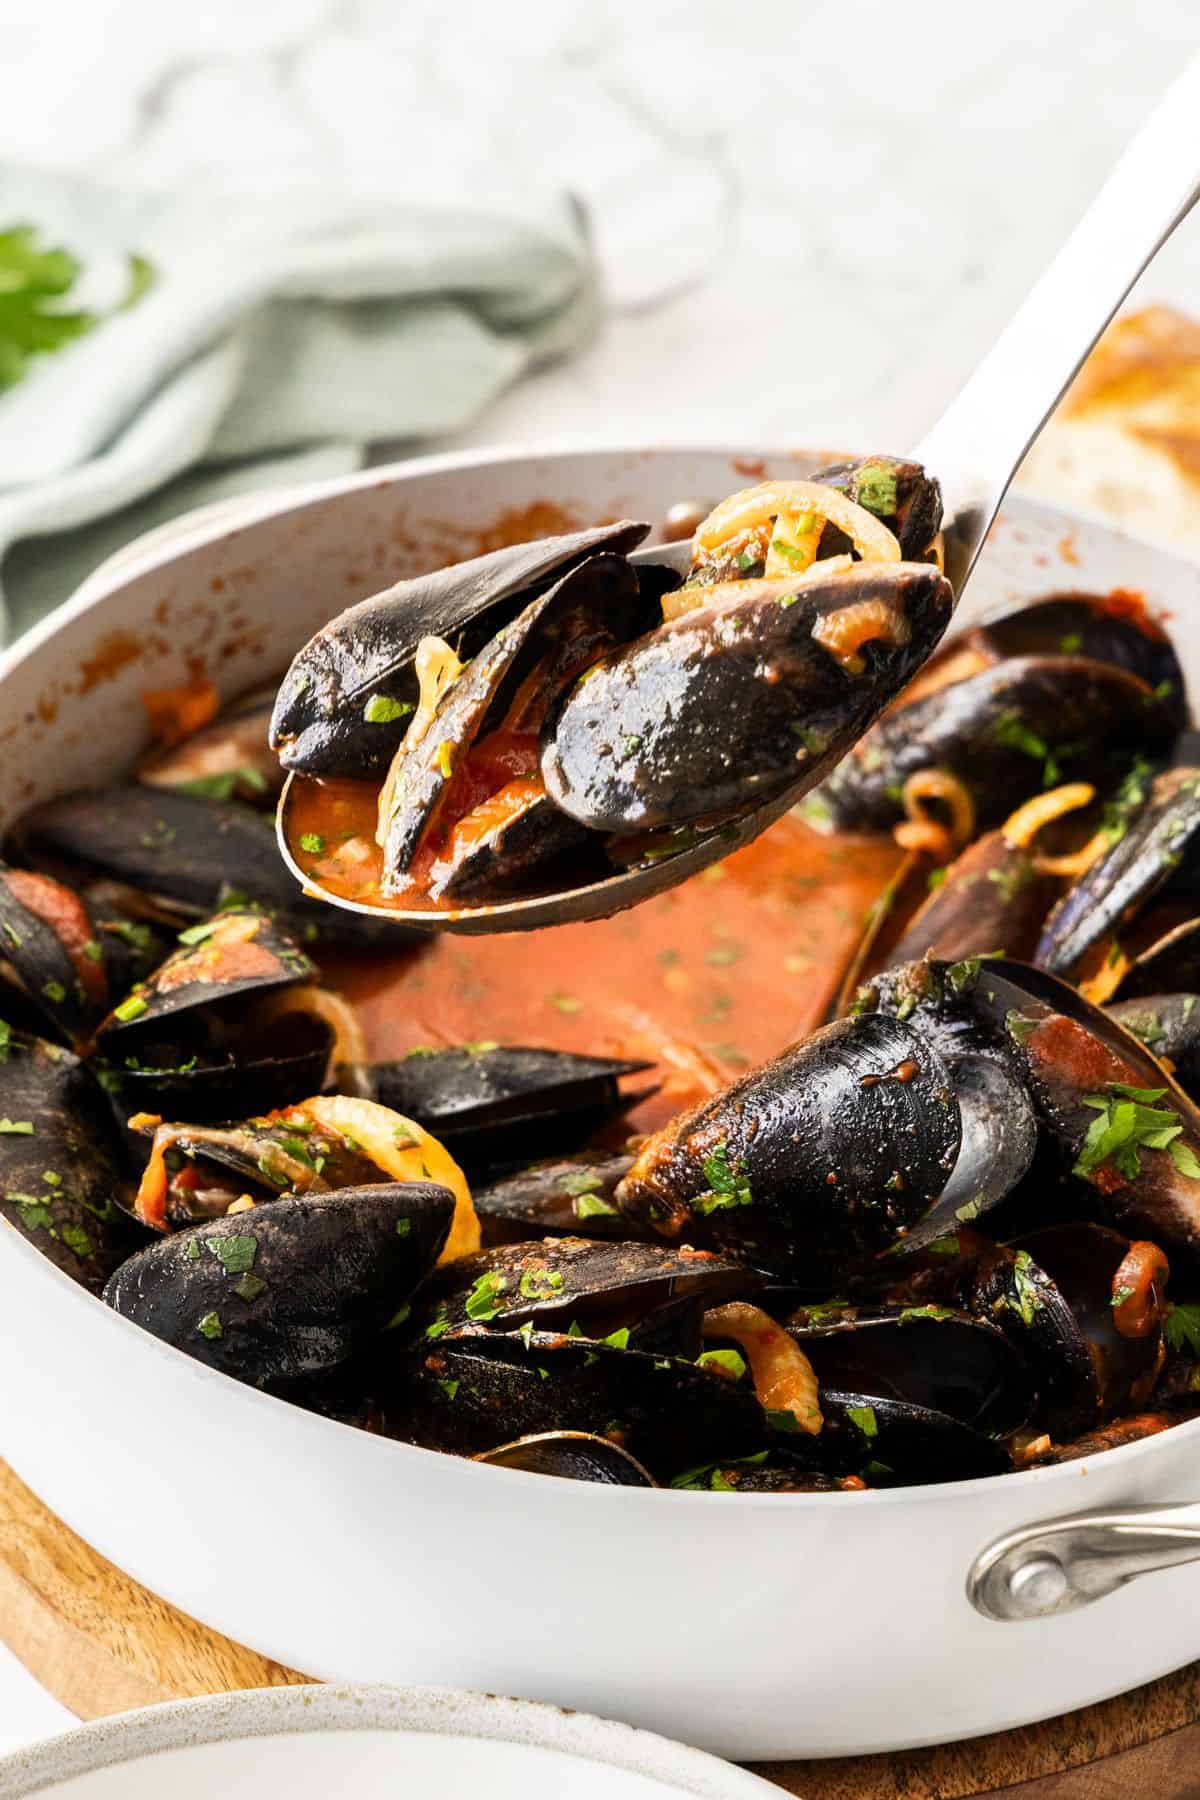 A spoon lifting up a serve of Mussels in Tomato Sauce.